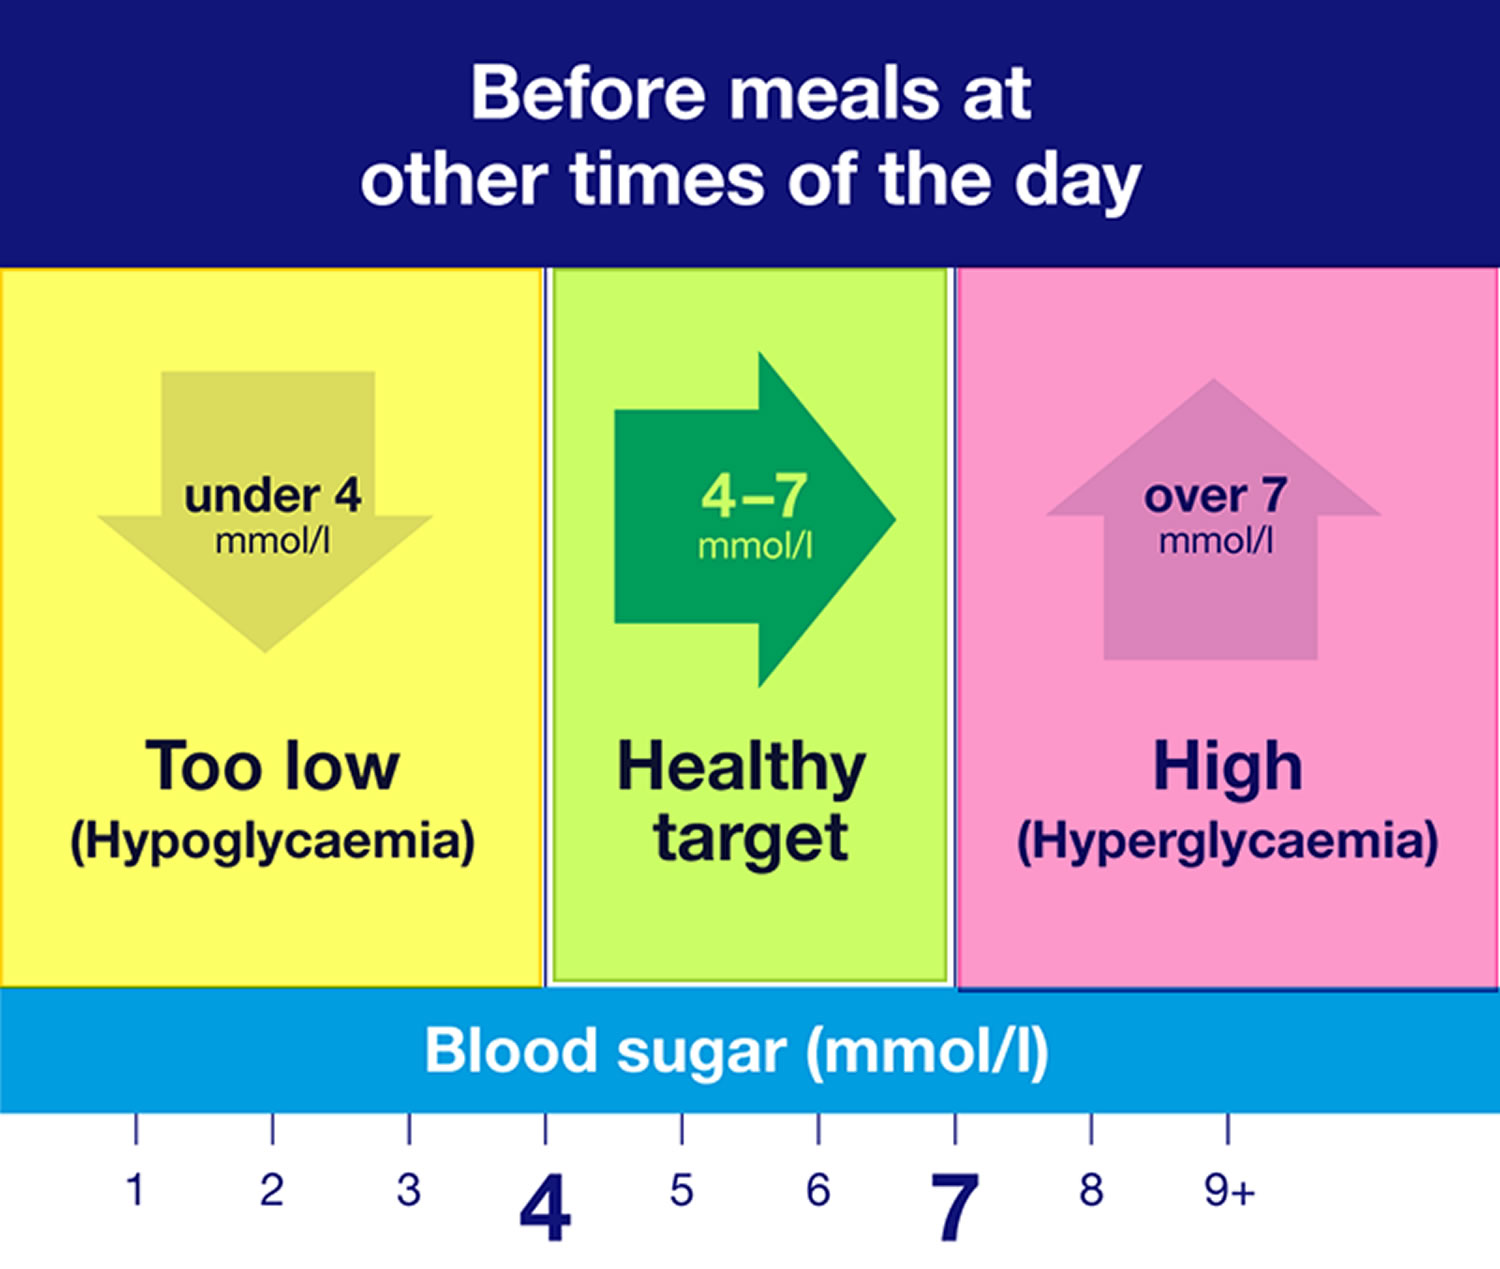 Blood sugar levels before meals